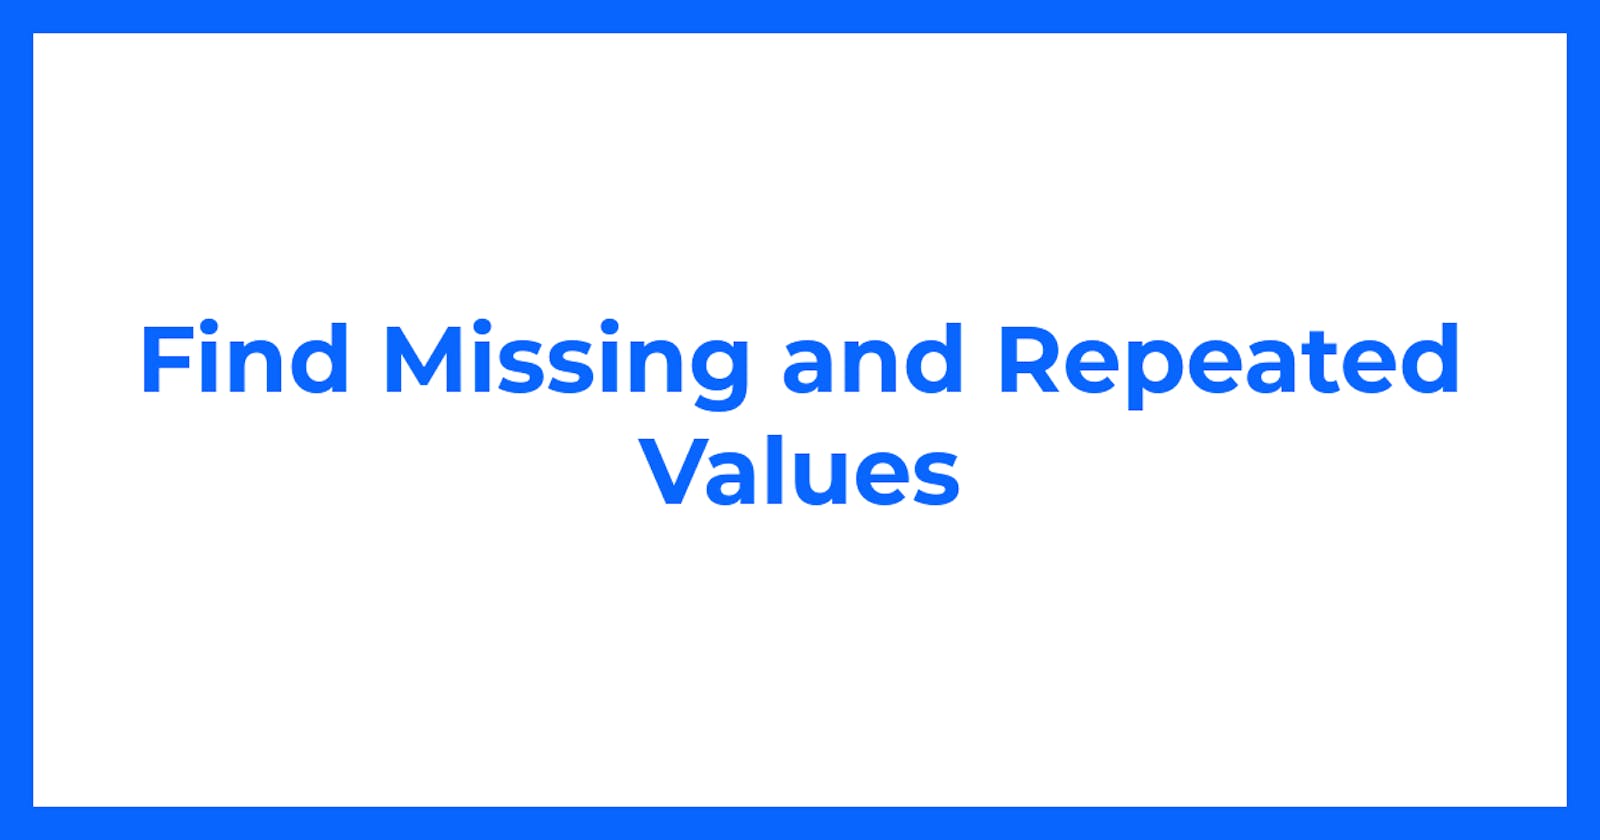 Find Missing and Repeated Values